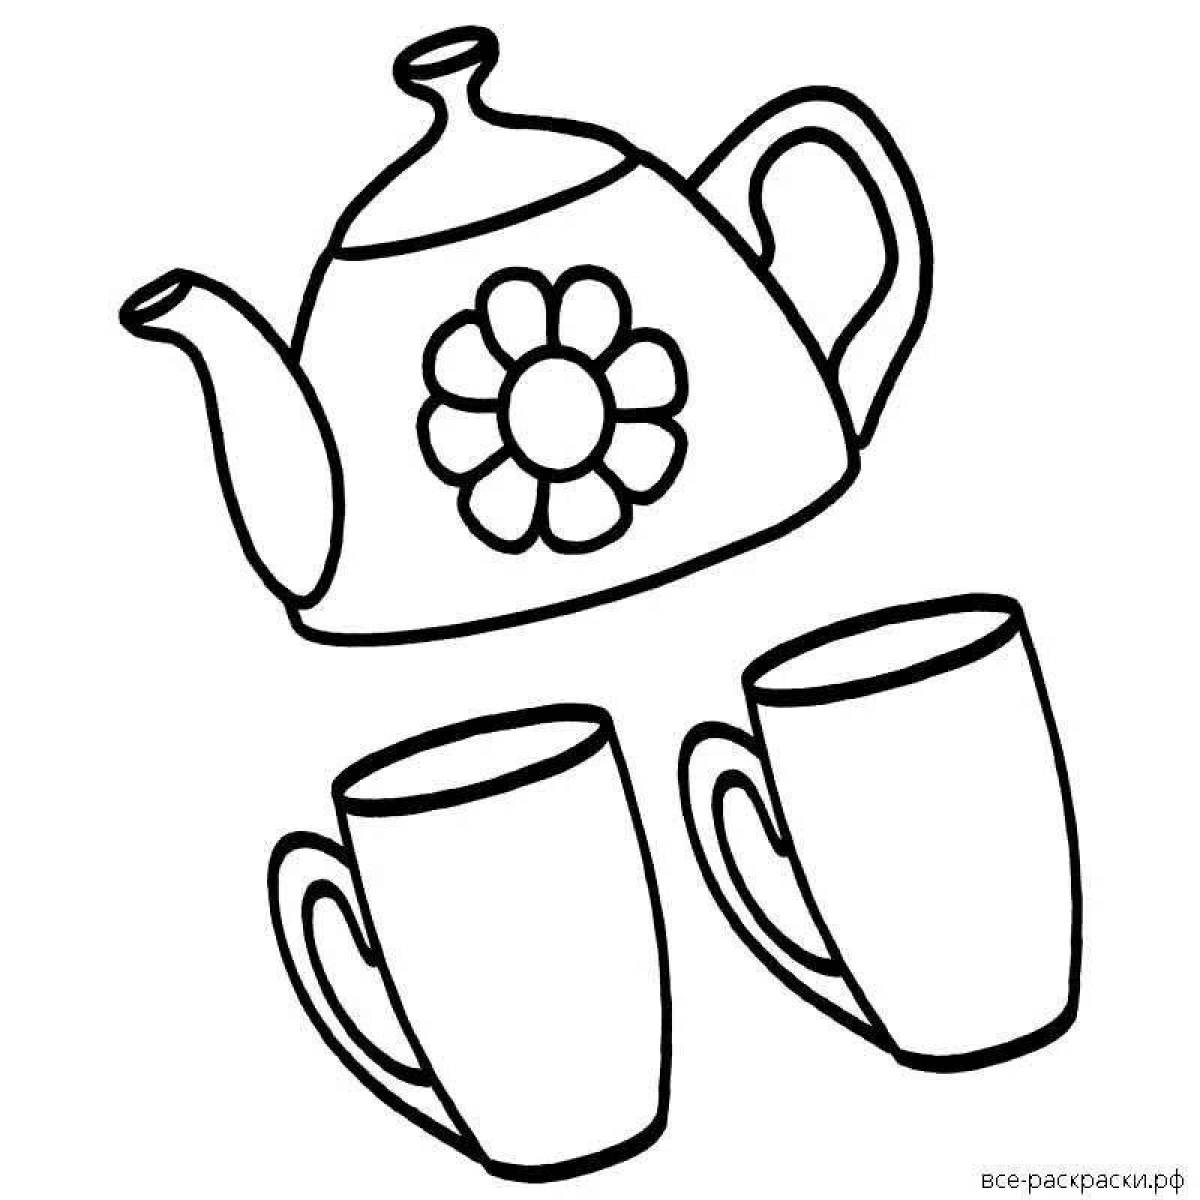 Colorful teapot and cup coloring book